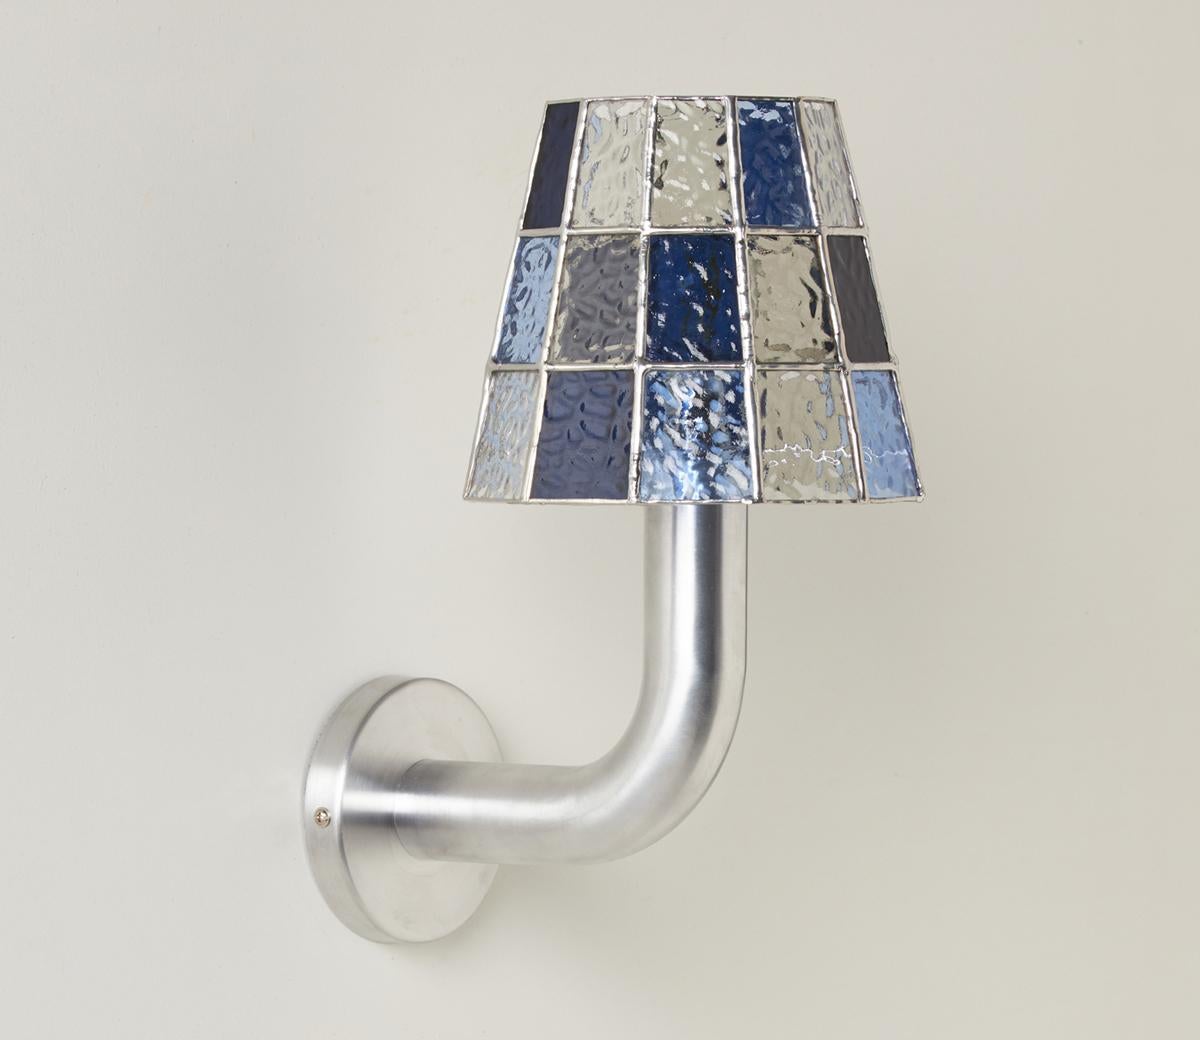 The Fun Guy Wall Light is equal parts whimsy and grace. 

Inspired by the forms and luminescent coloring of wild mushrooms and fungi, a chunky aluminum base is capped with a handmade stained glass shade that provides an ever changing interplay of